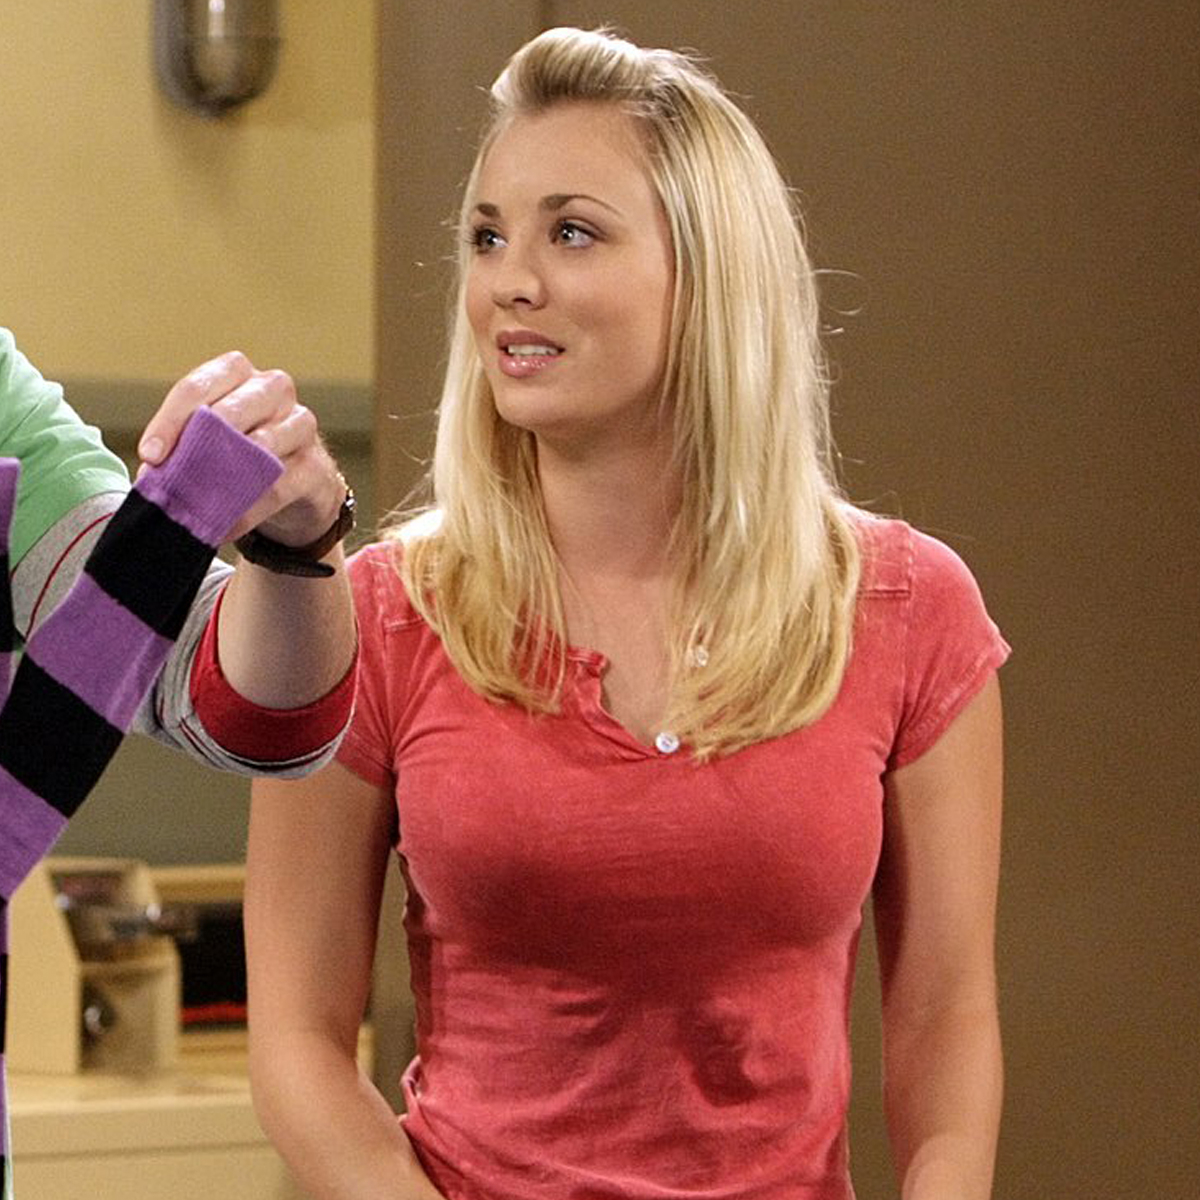 Kaley Cuoco Pov Porn - The Big Bang Theory Nearly Cast This Star Over Kaley Cuoco - E! Online